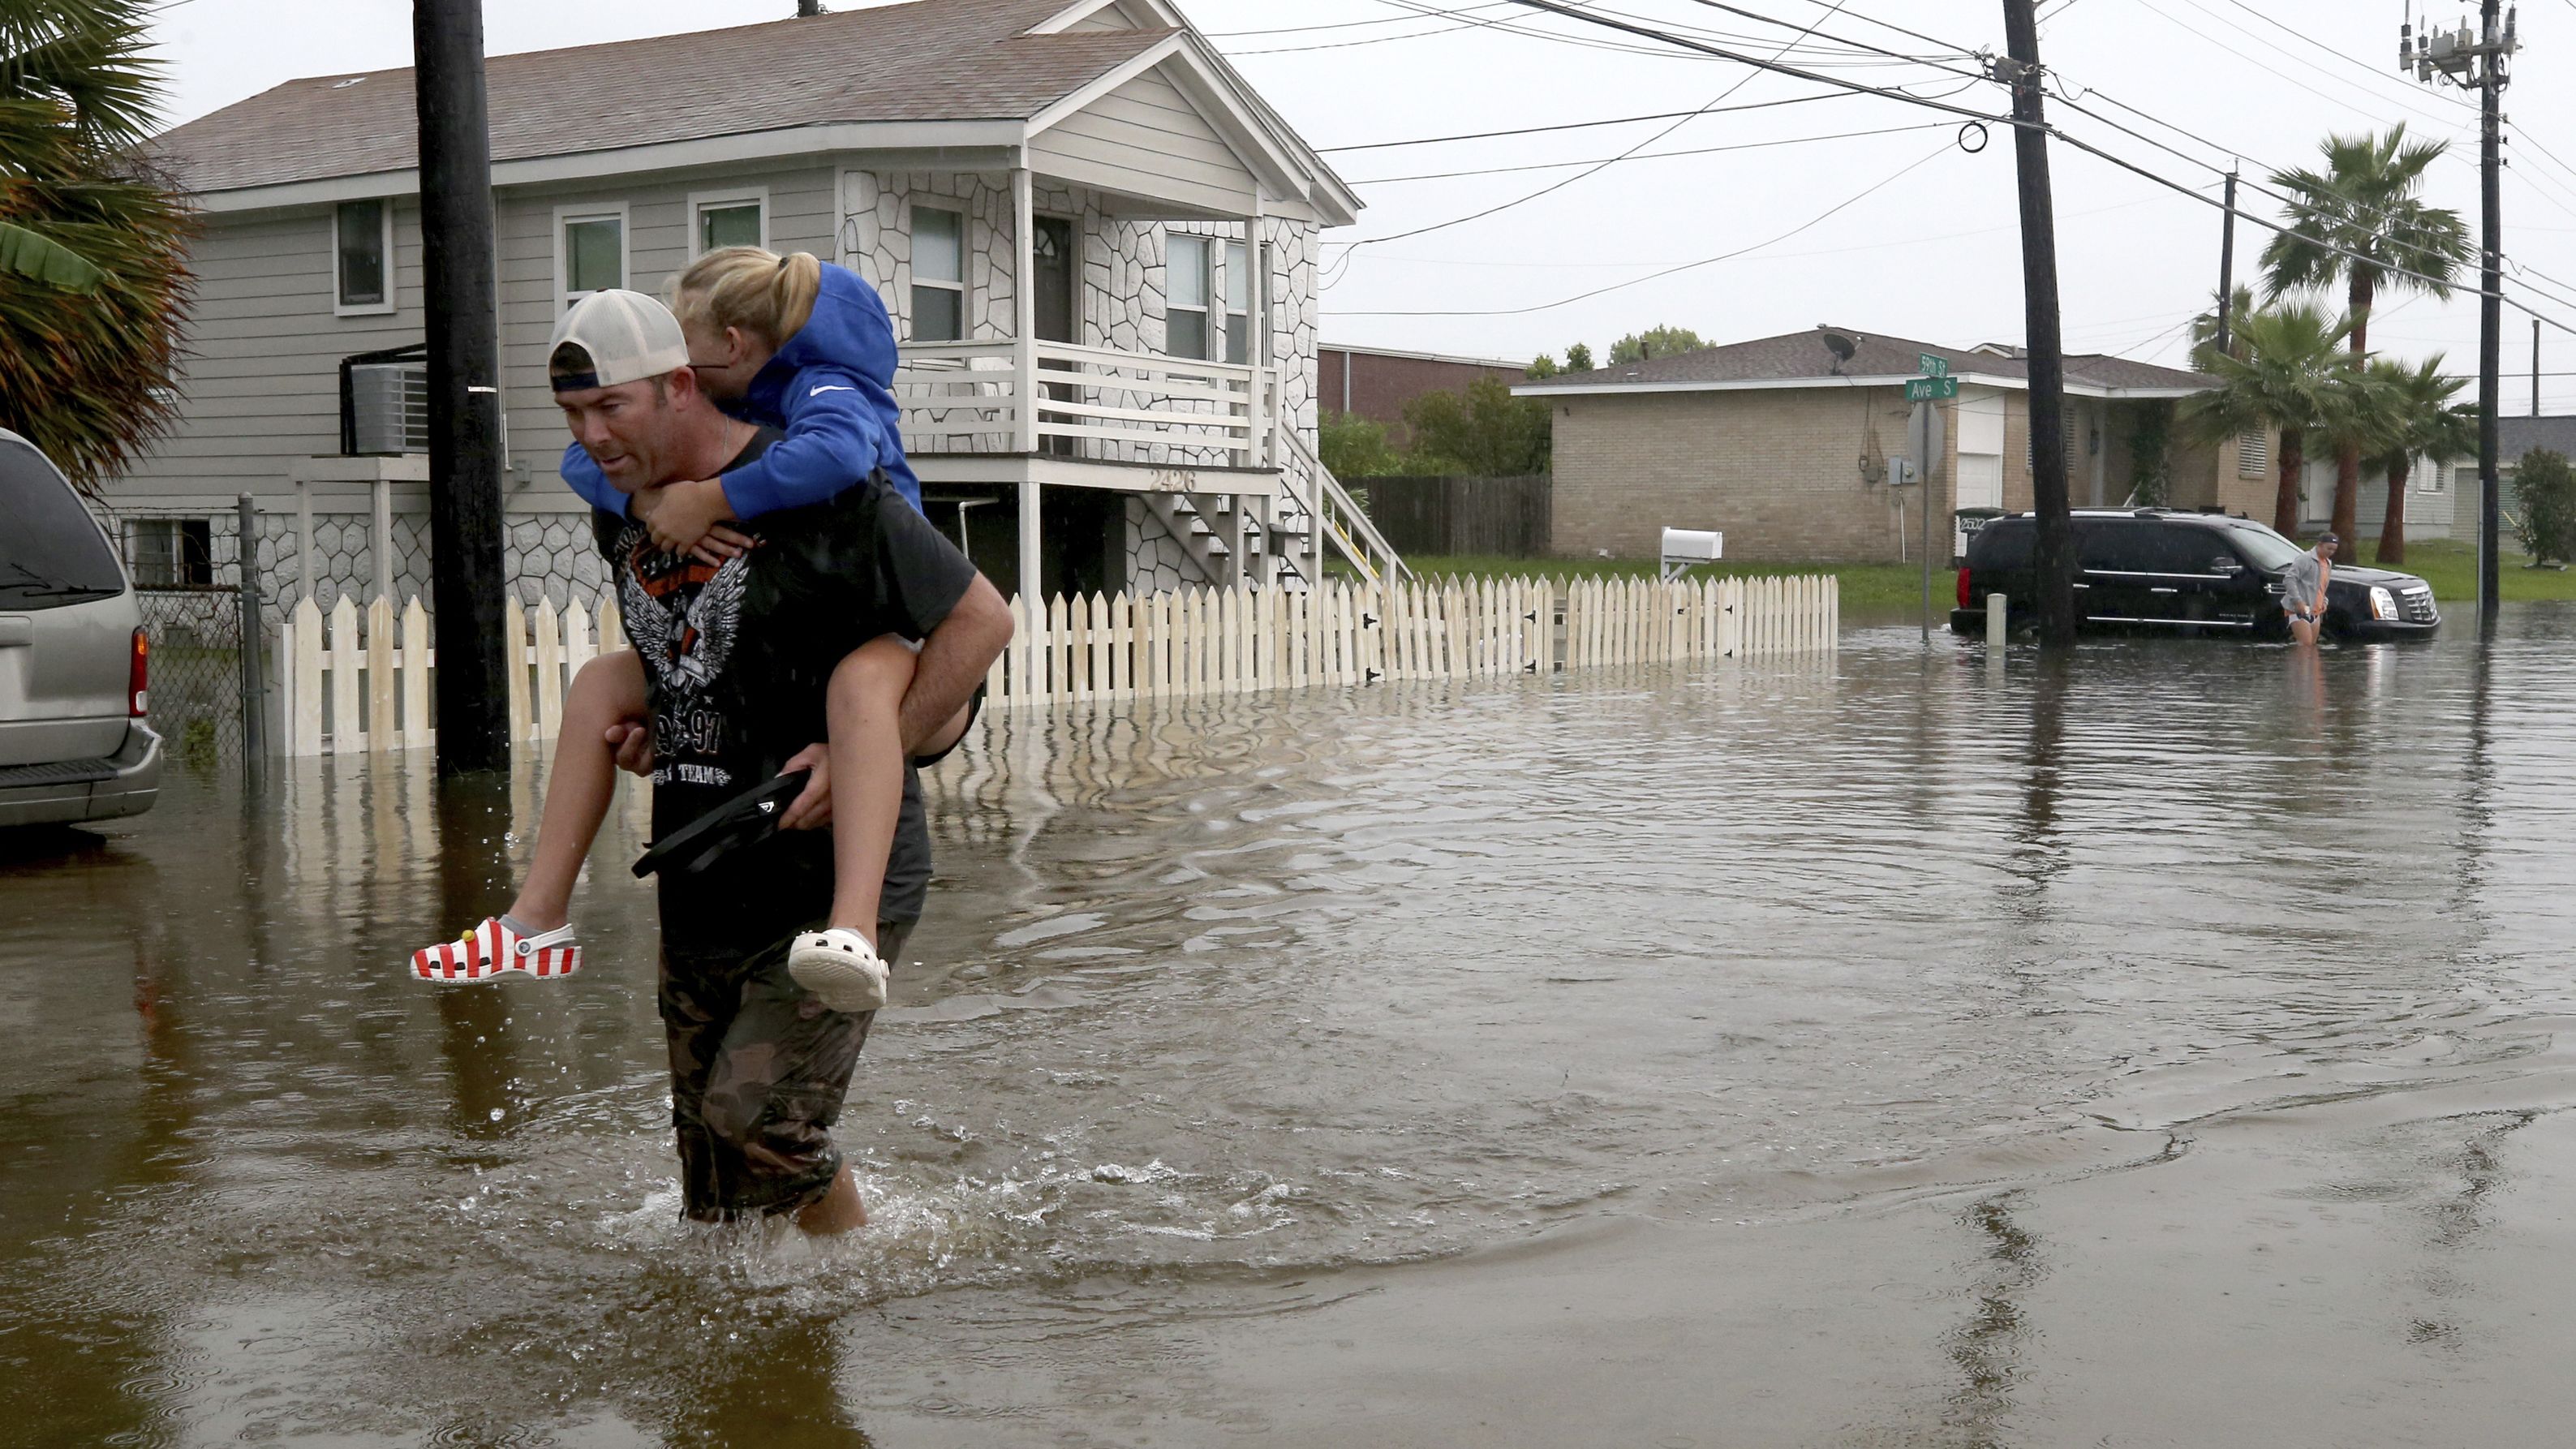 A father carries his daughter through high water in Galveston, Texas, after Imelda caused flooding in the area.